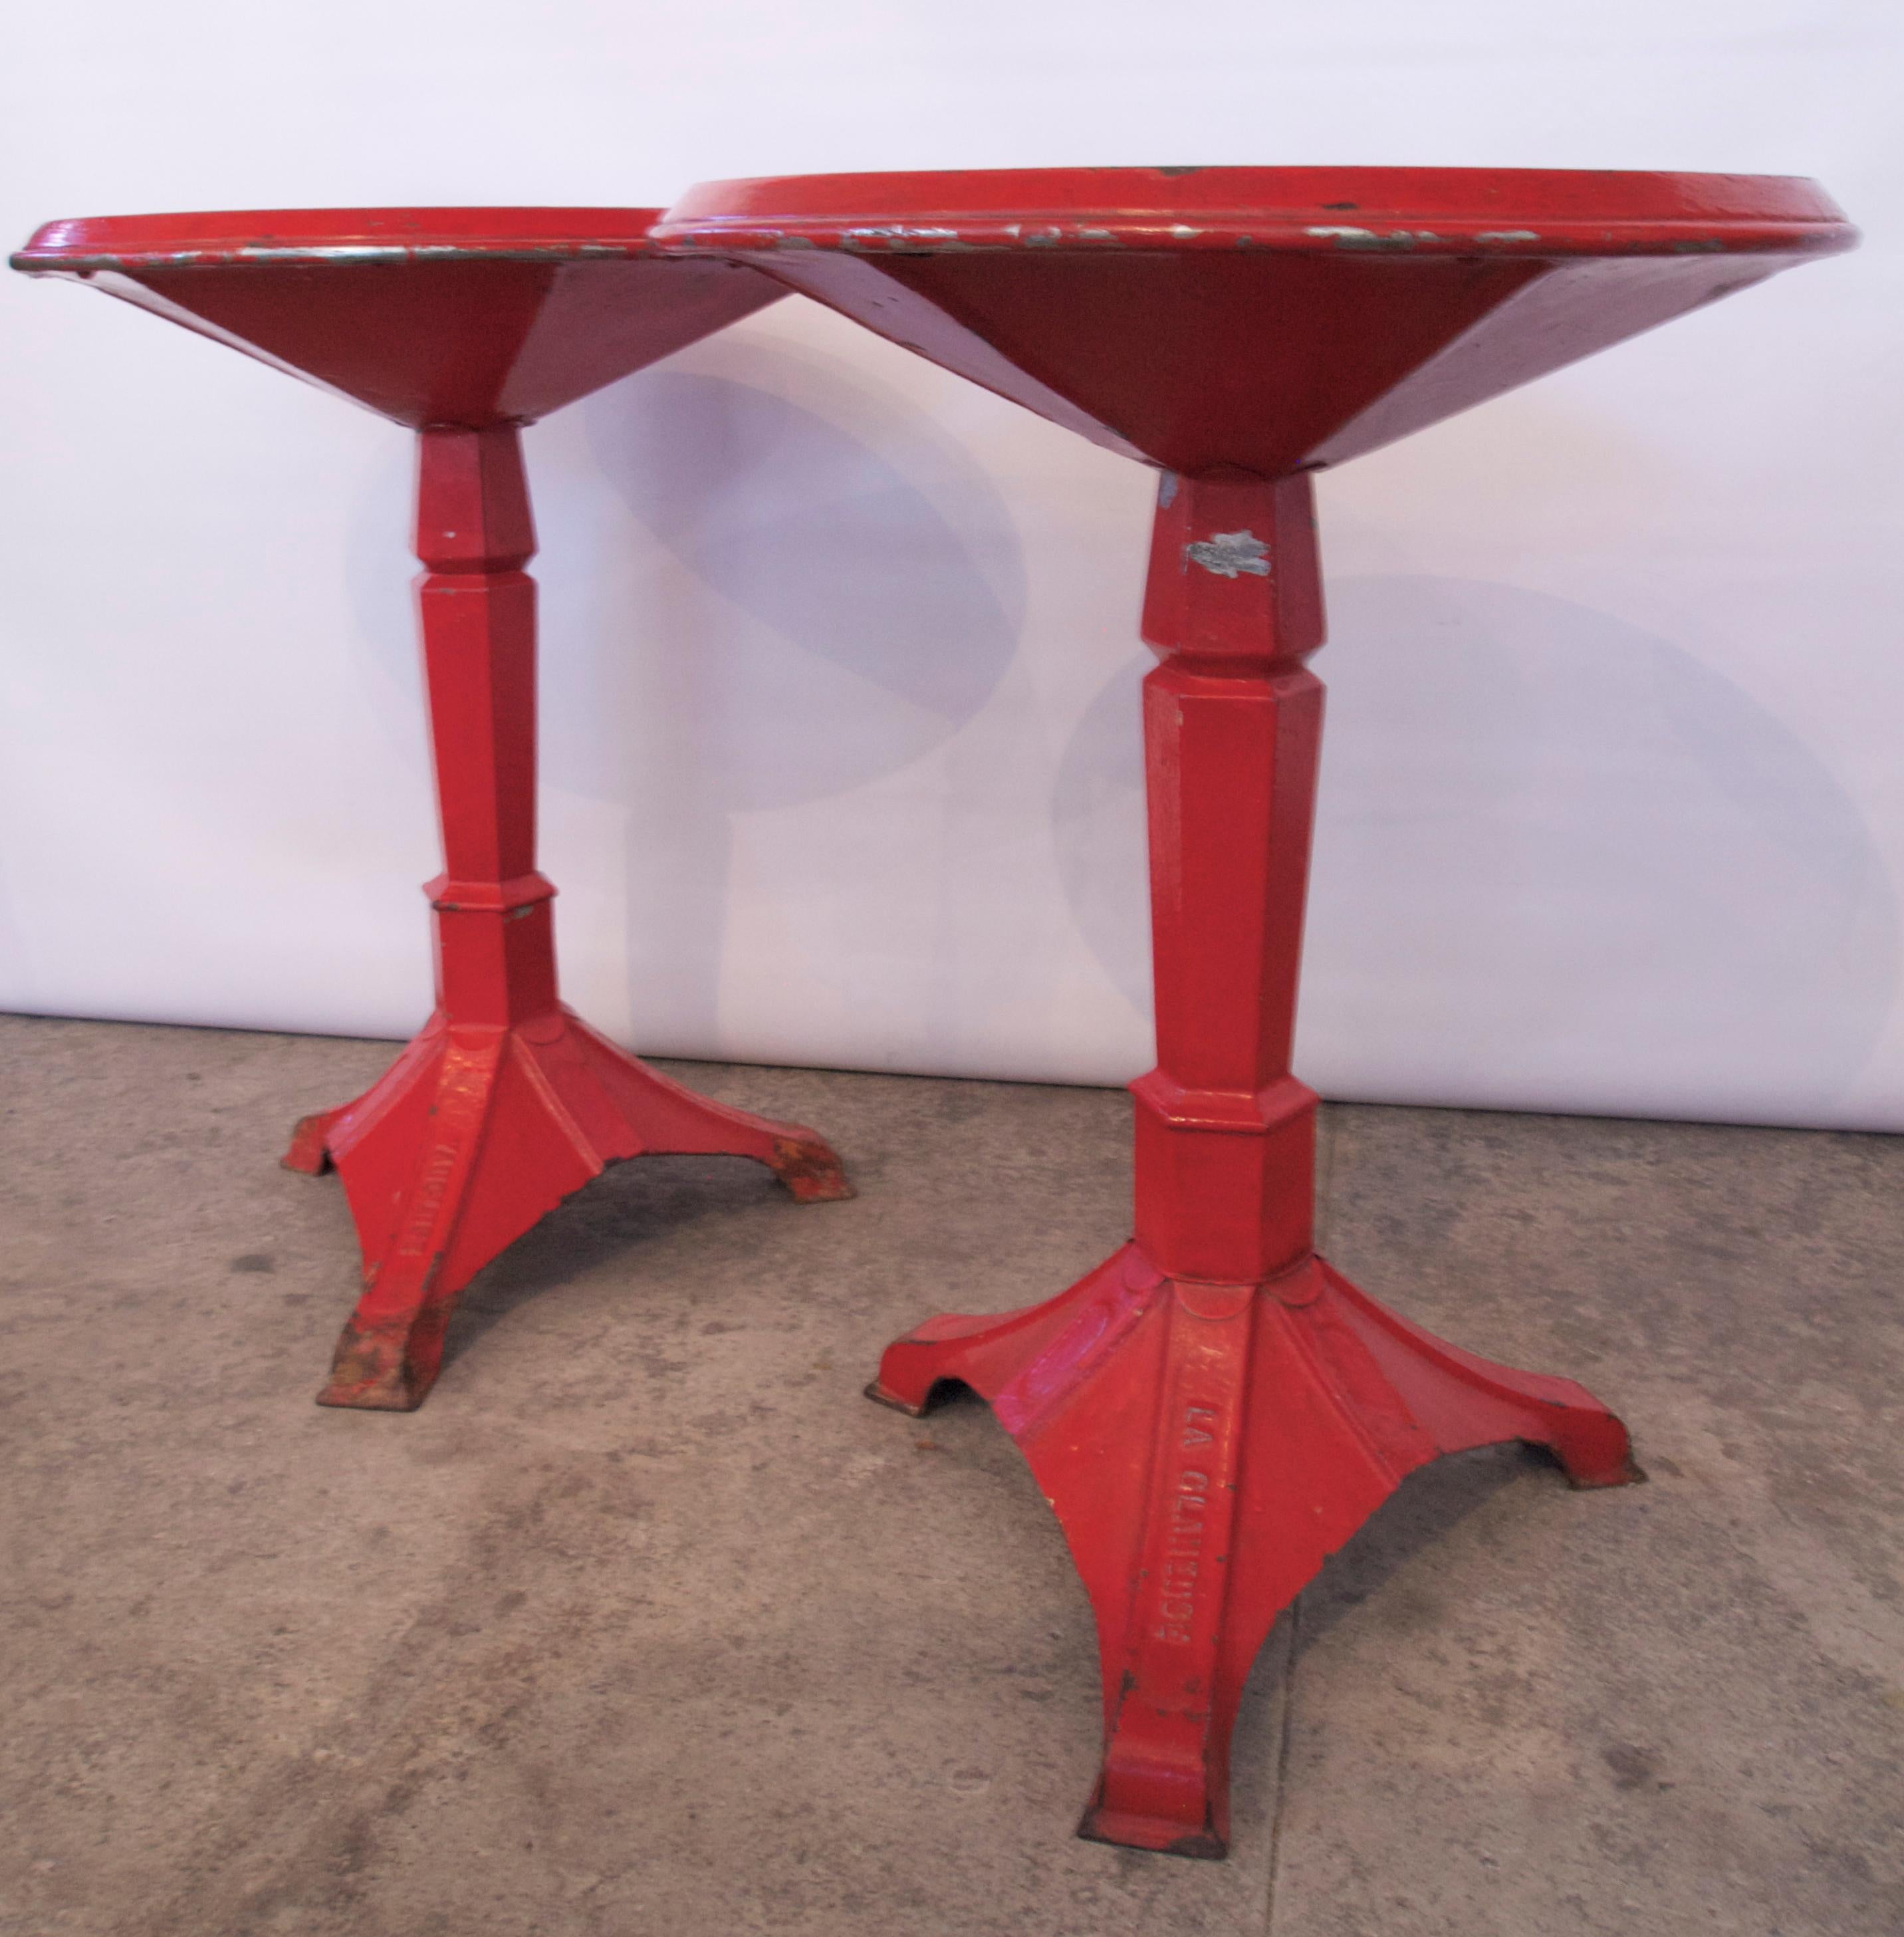 Wonderful pair of French Industrial/ Modern Art Deco Period red painted steel and cast Iron gueridon bistro tables. Manufactured in Cadenet / Departement of Vaucluse.
Turn of the 19th century
Provence, France.